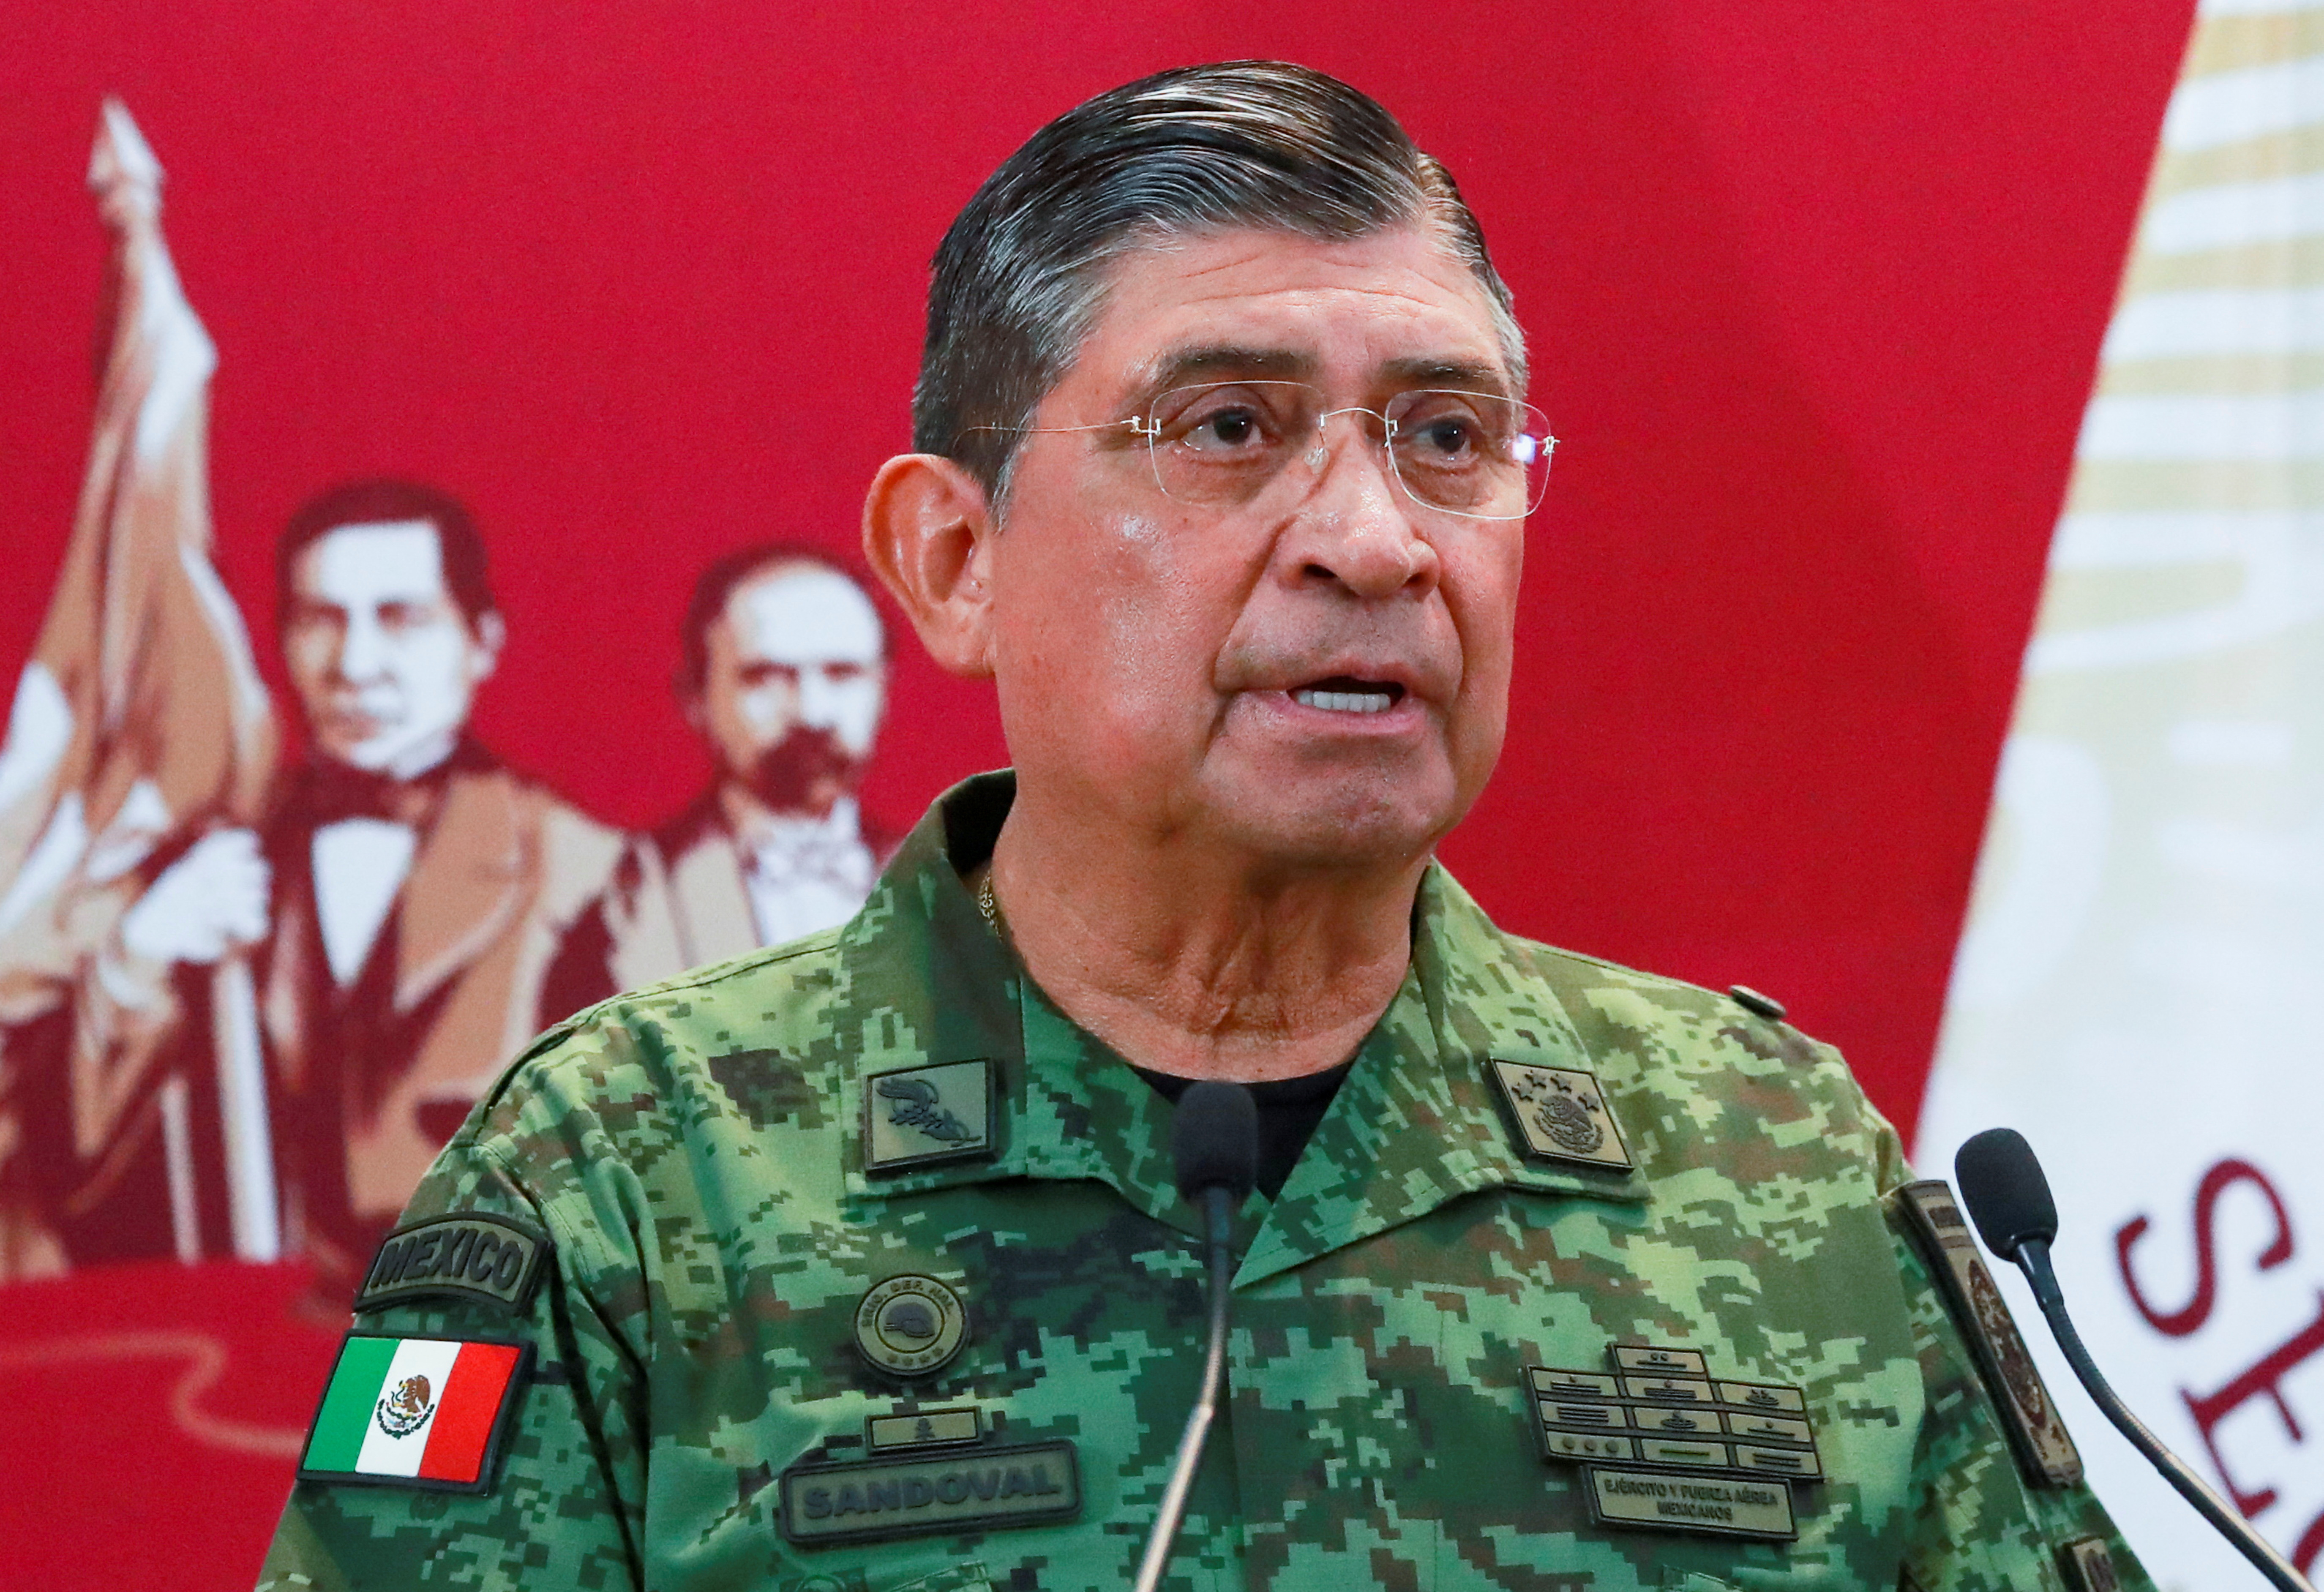 Mexico's Secretary of Defense Luis Cresencio Sandoval speaks during a news conference after Mexican drug cartel leader Ovidio Guzman, a son of incarcerated kingpin Joaquin "El Chapo" Guzman, was arrested by Mexican authorities in Culiacan, In Mexico City, Mexico January 5, 2023. REUTERS/Henry Romero